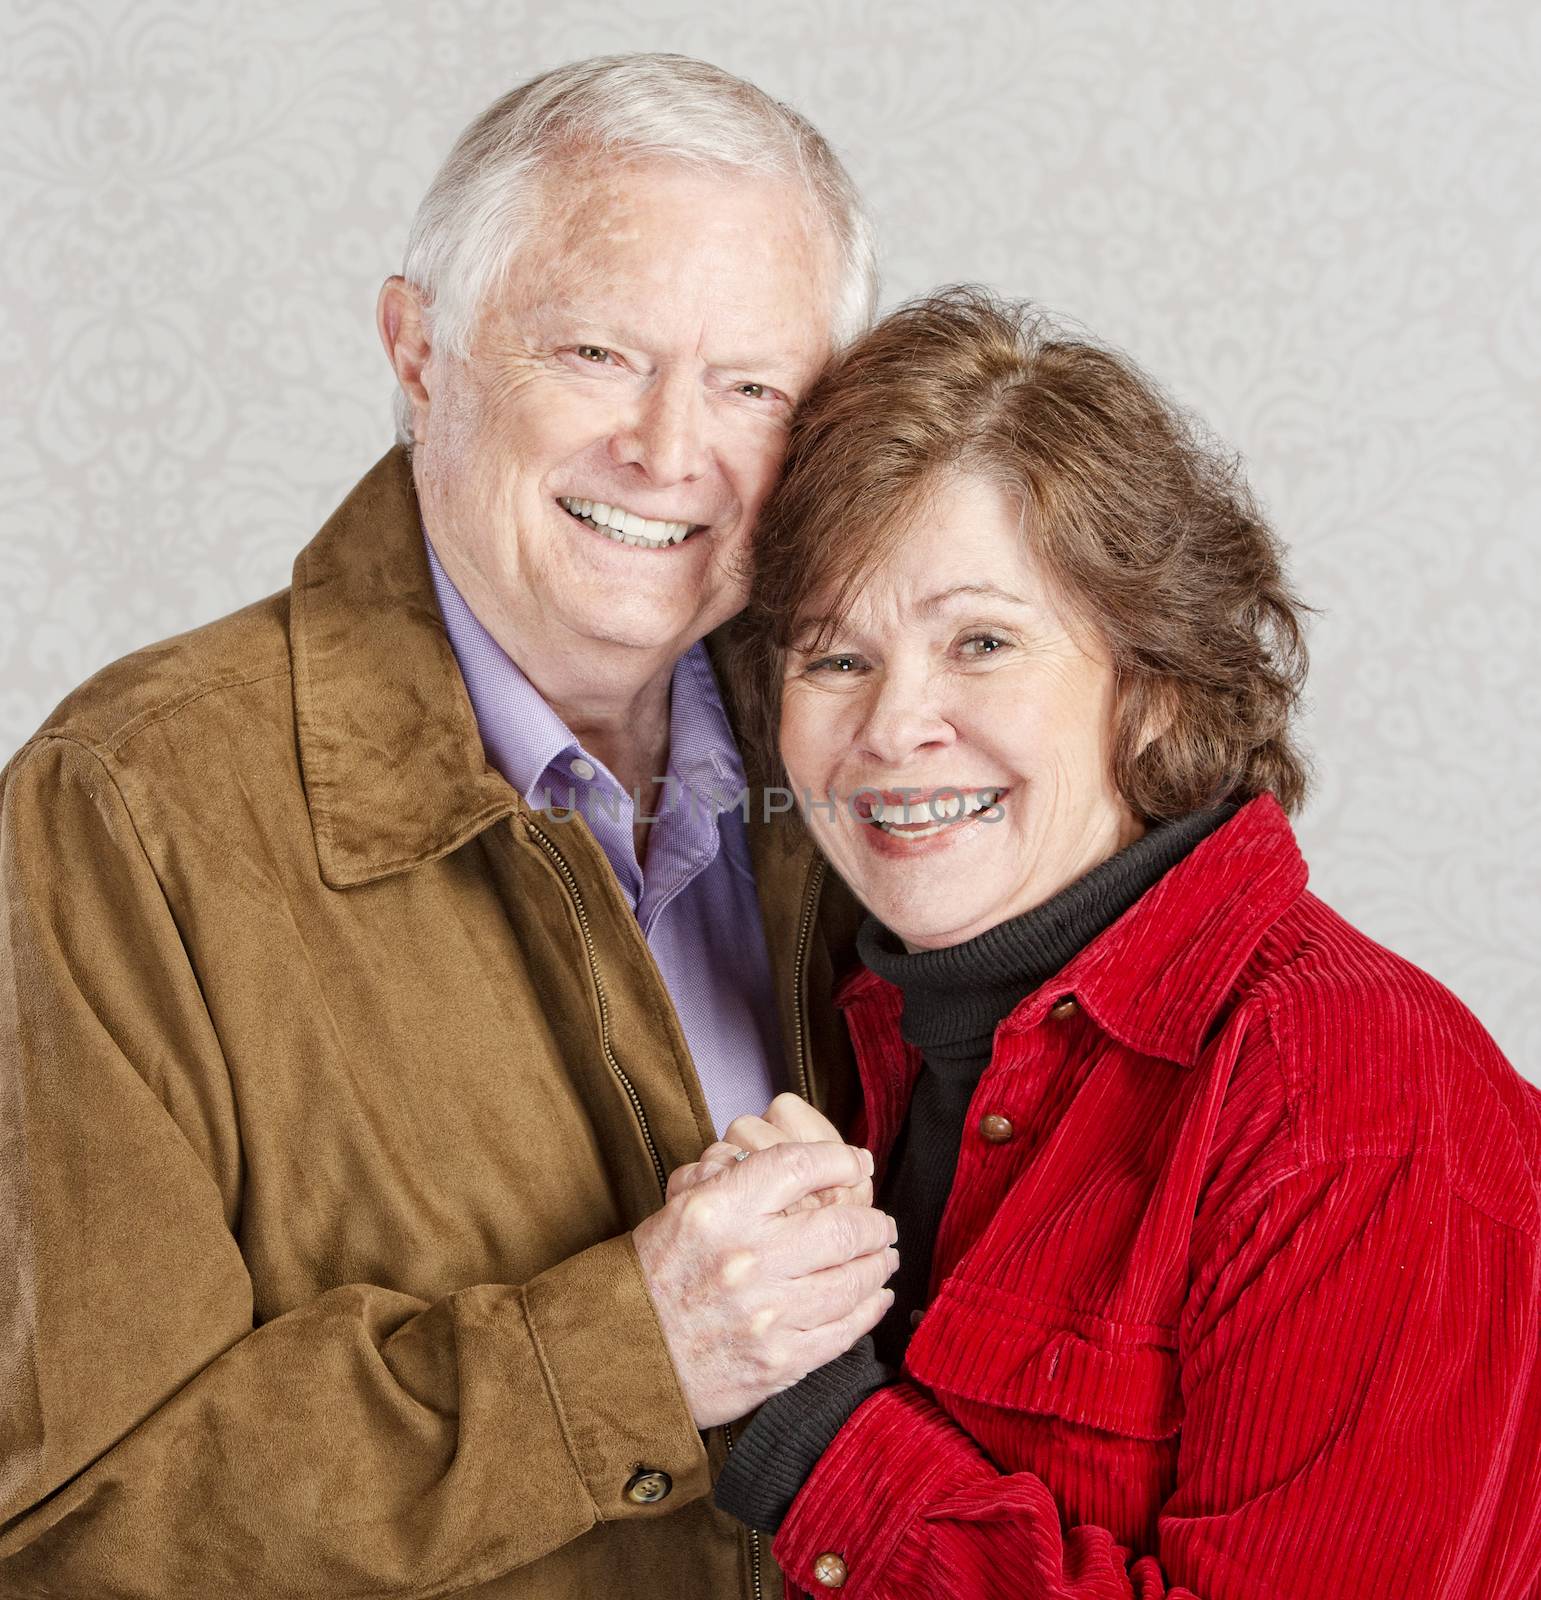 Smiling Caucasian older couple embracing and holding hands